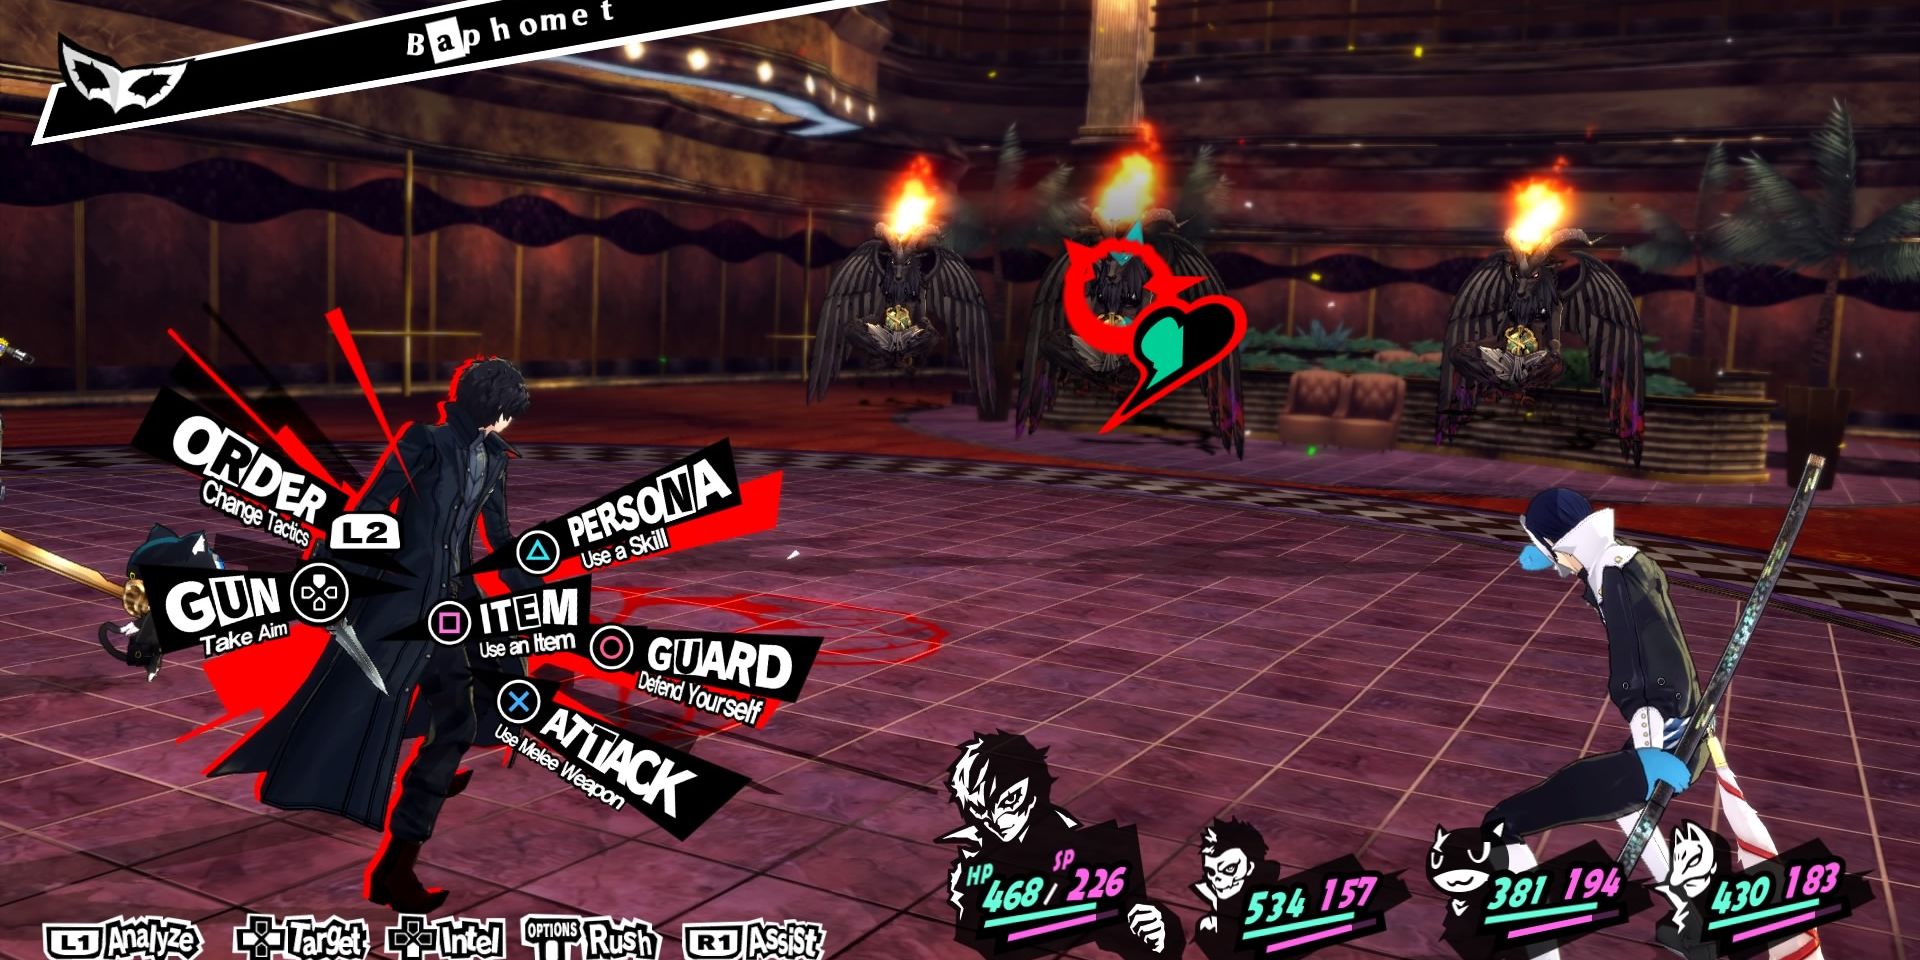 Joker and his friends fight several Baphomets in Persona 5 Royal